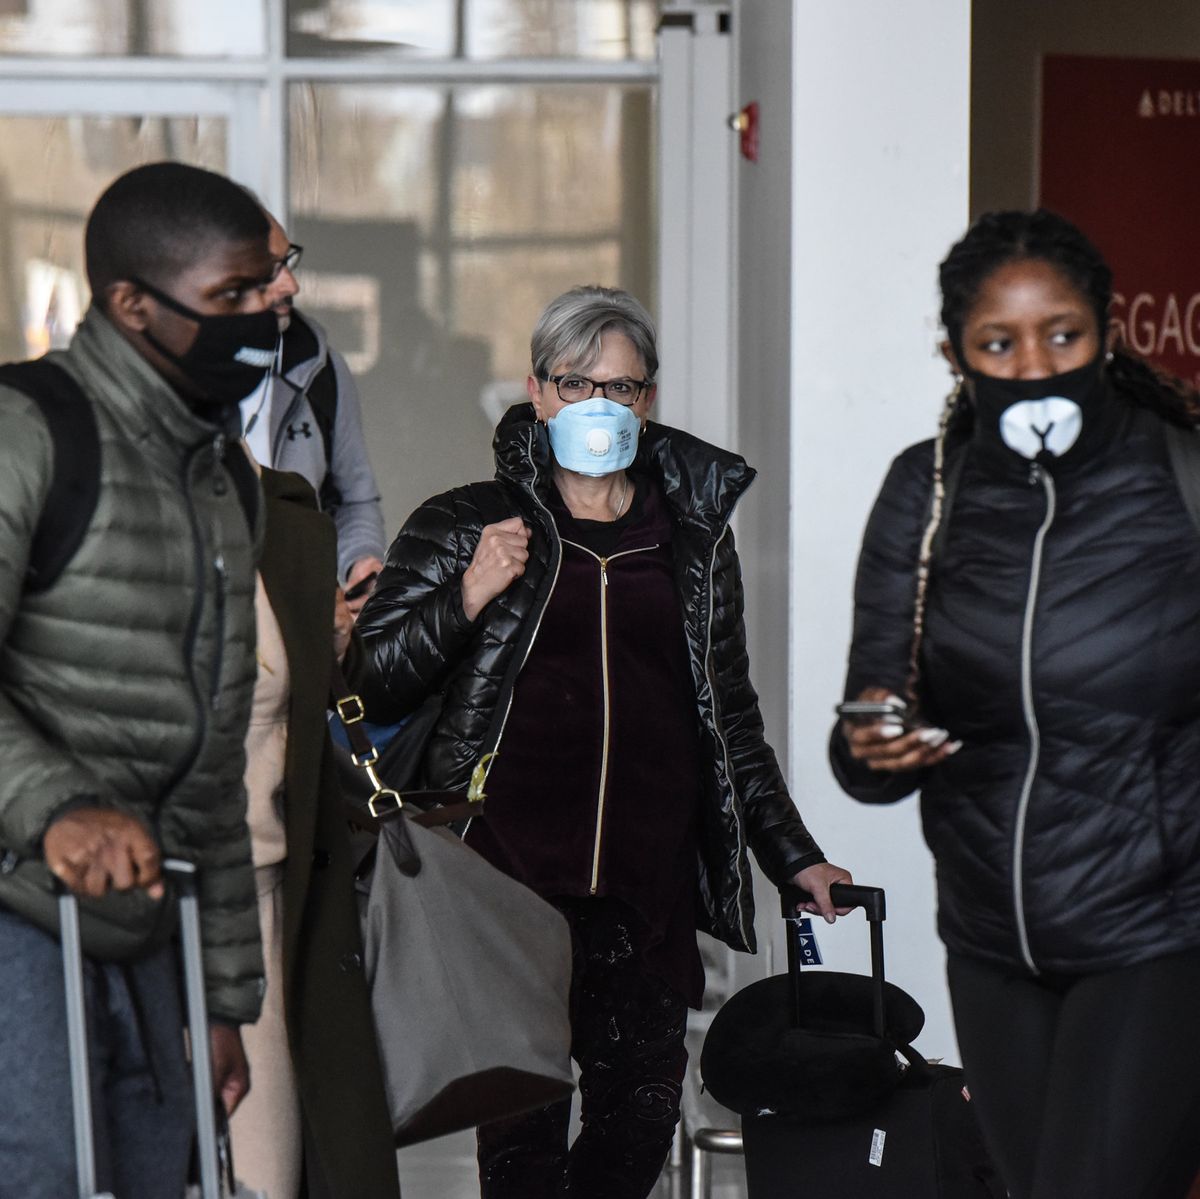 Trump Administration urges citizens to wear face masks in public